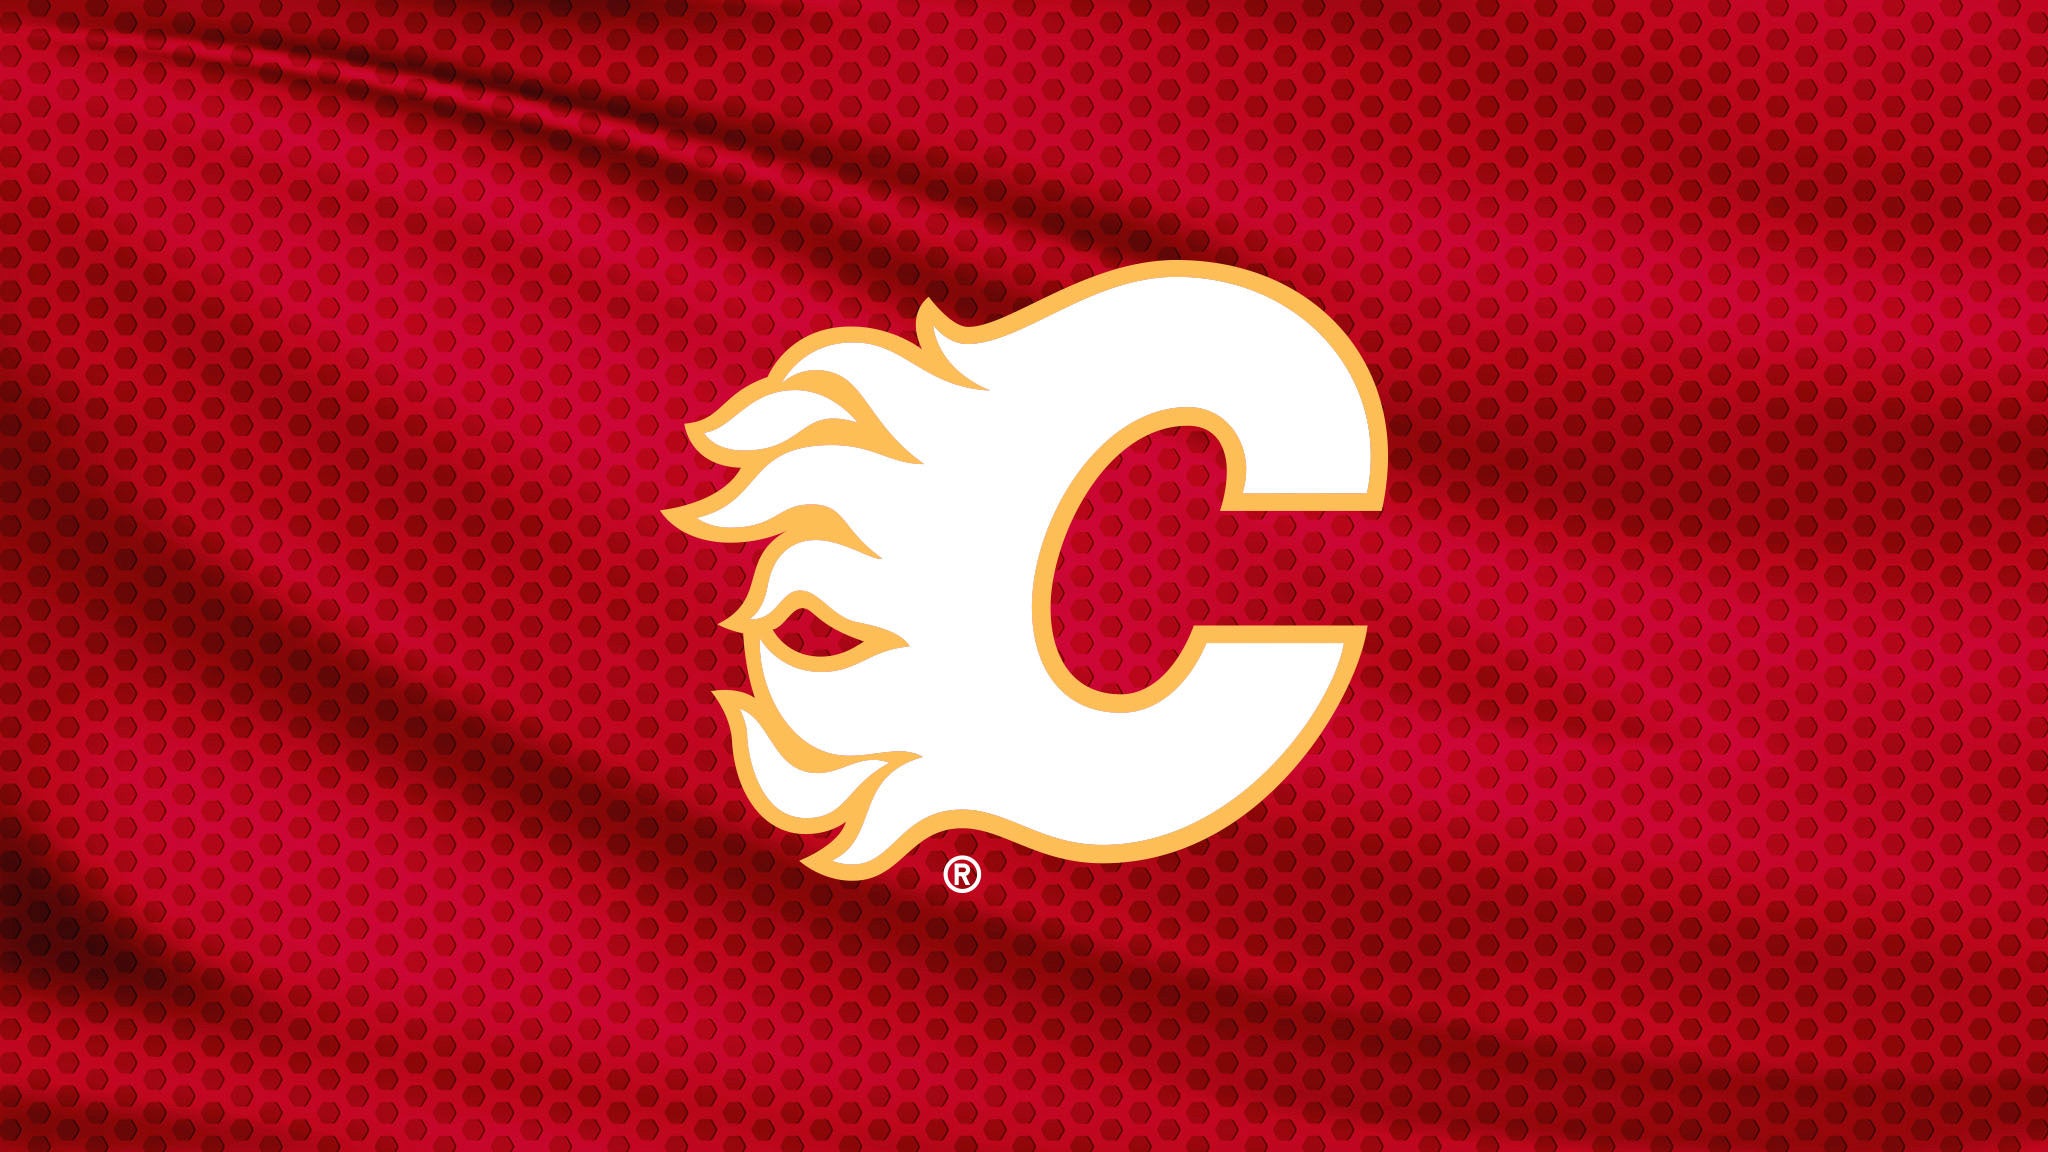 Calgary Flames vs. St. Louis Blues in Calgary promo photo for Black Friday  presale offer code